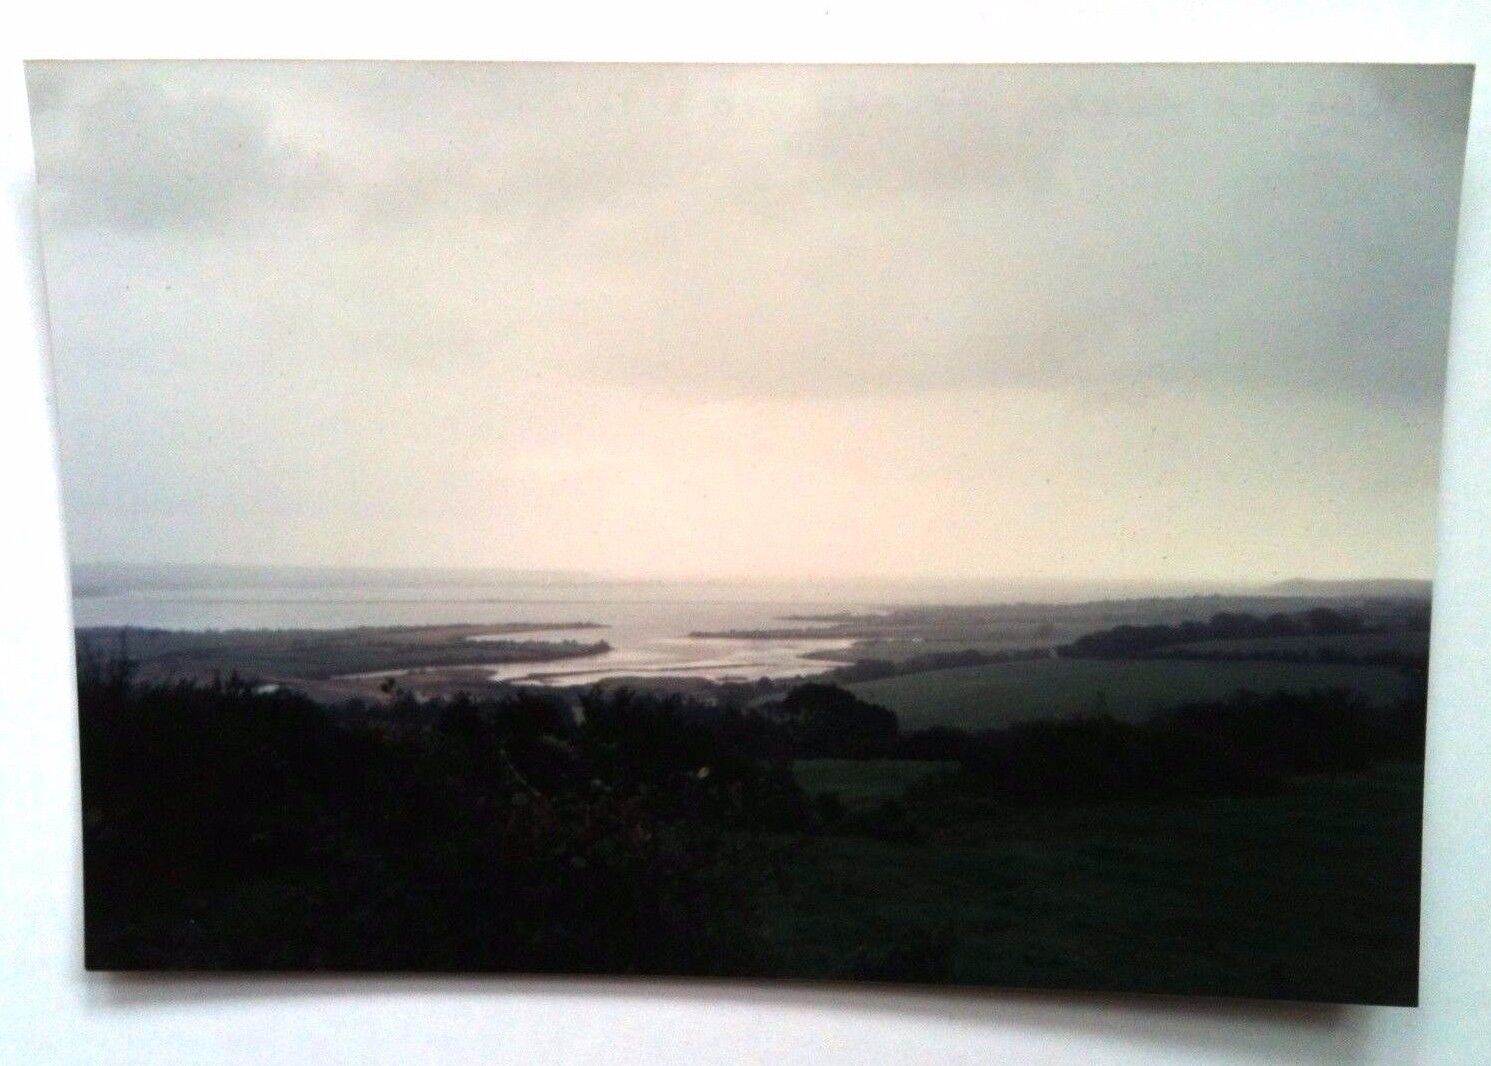 Vintage 90s Photo Family Vacation Ring Of Kerry Ireland Ocean Trees Grass Clouds